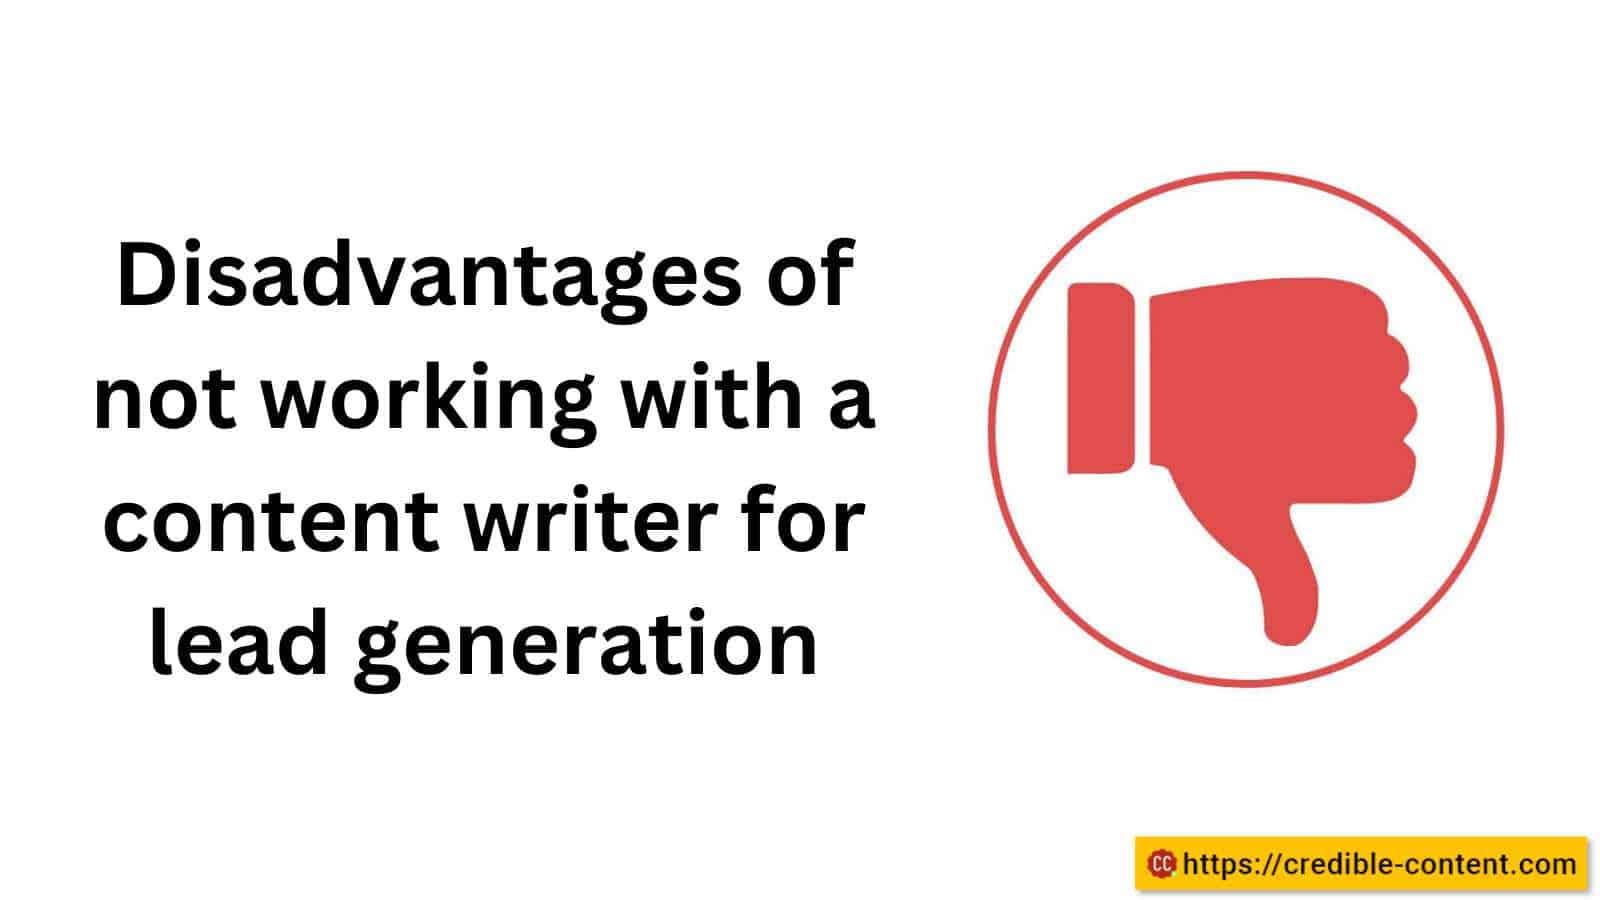 Disadvantages of not working with a content writer for lead generation